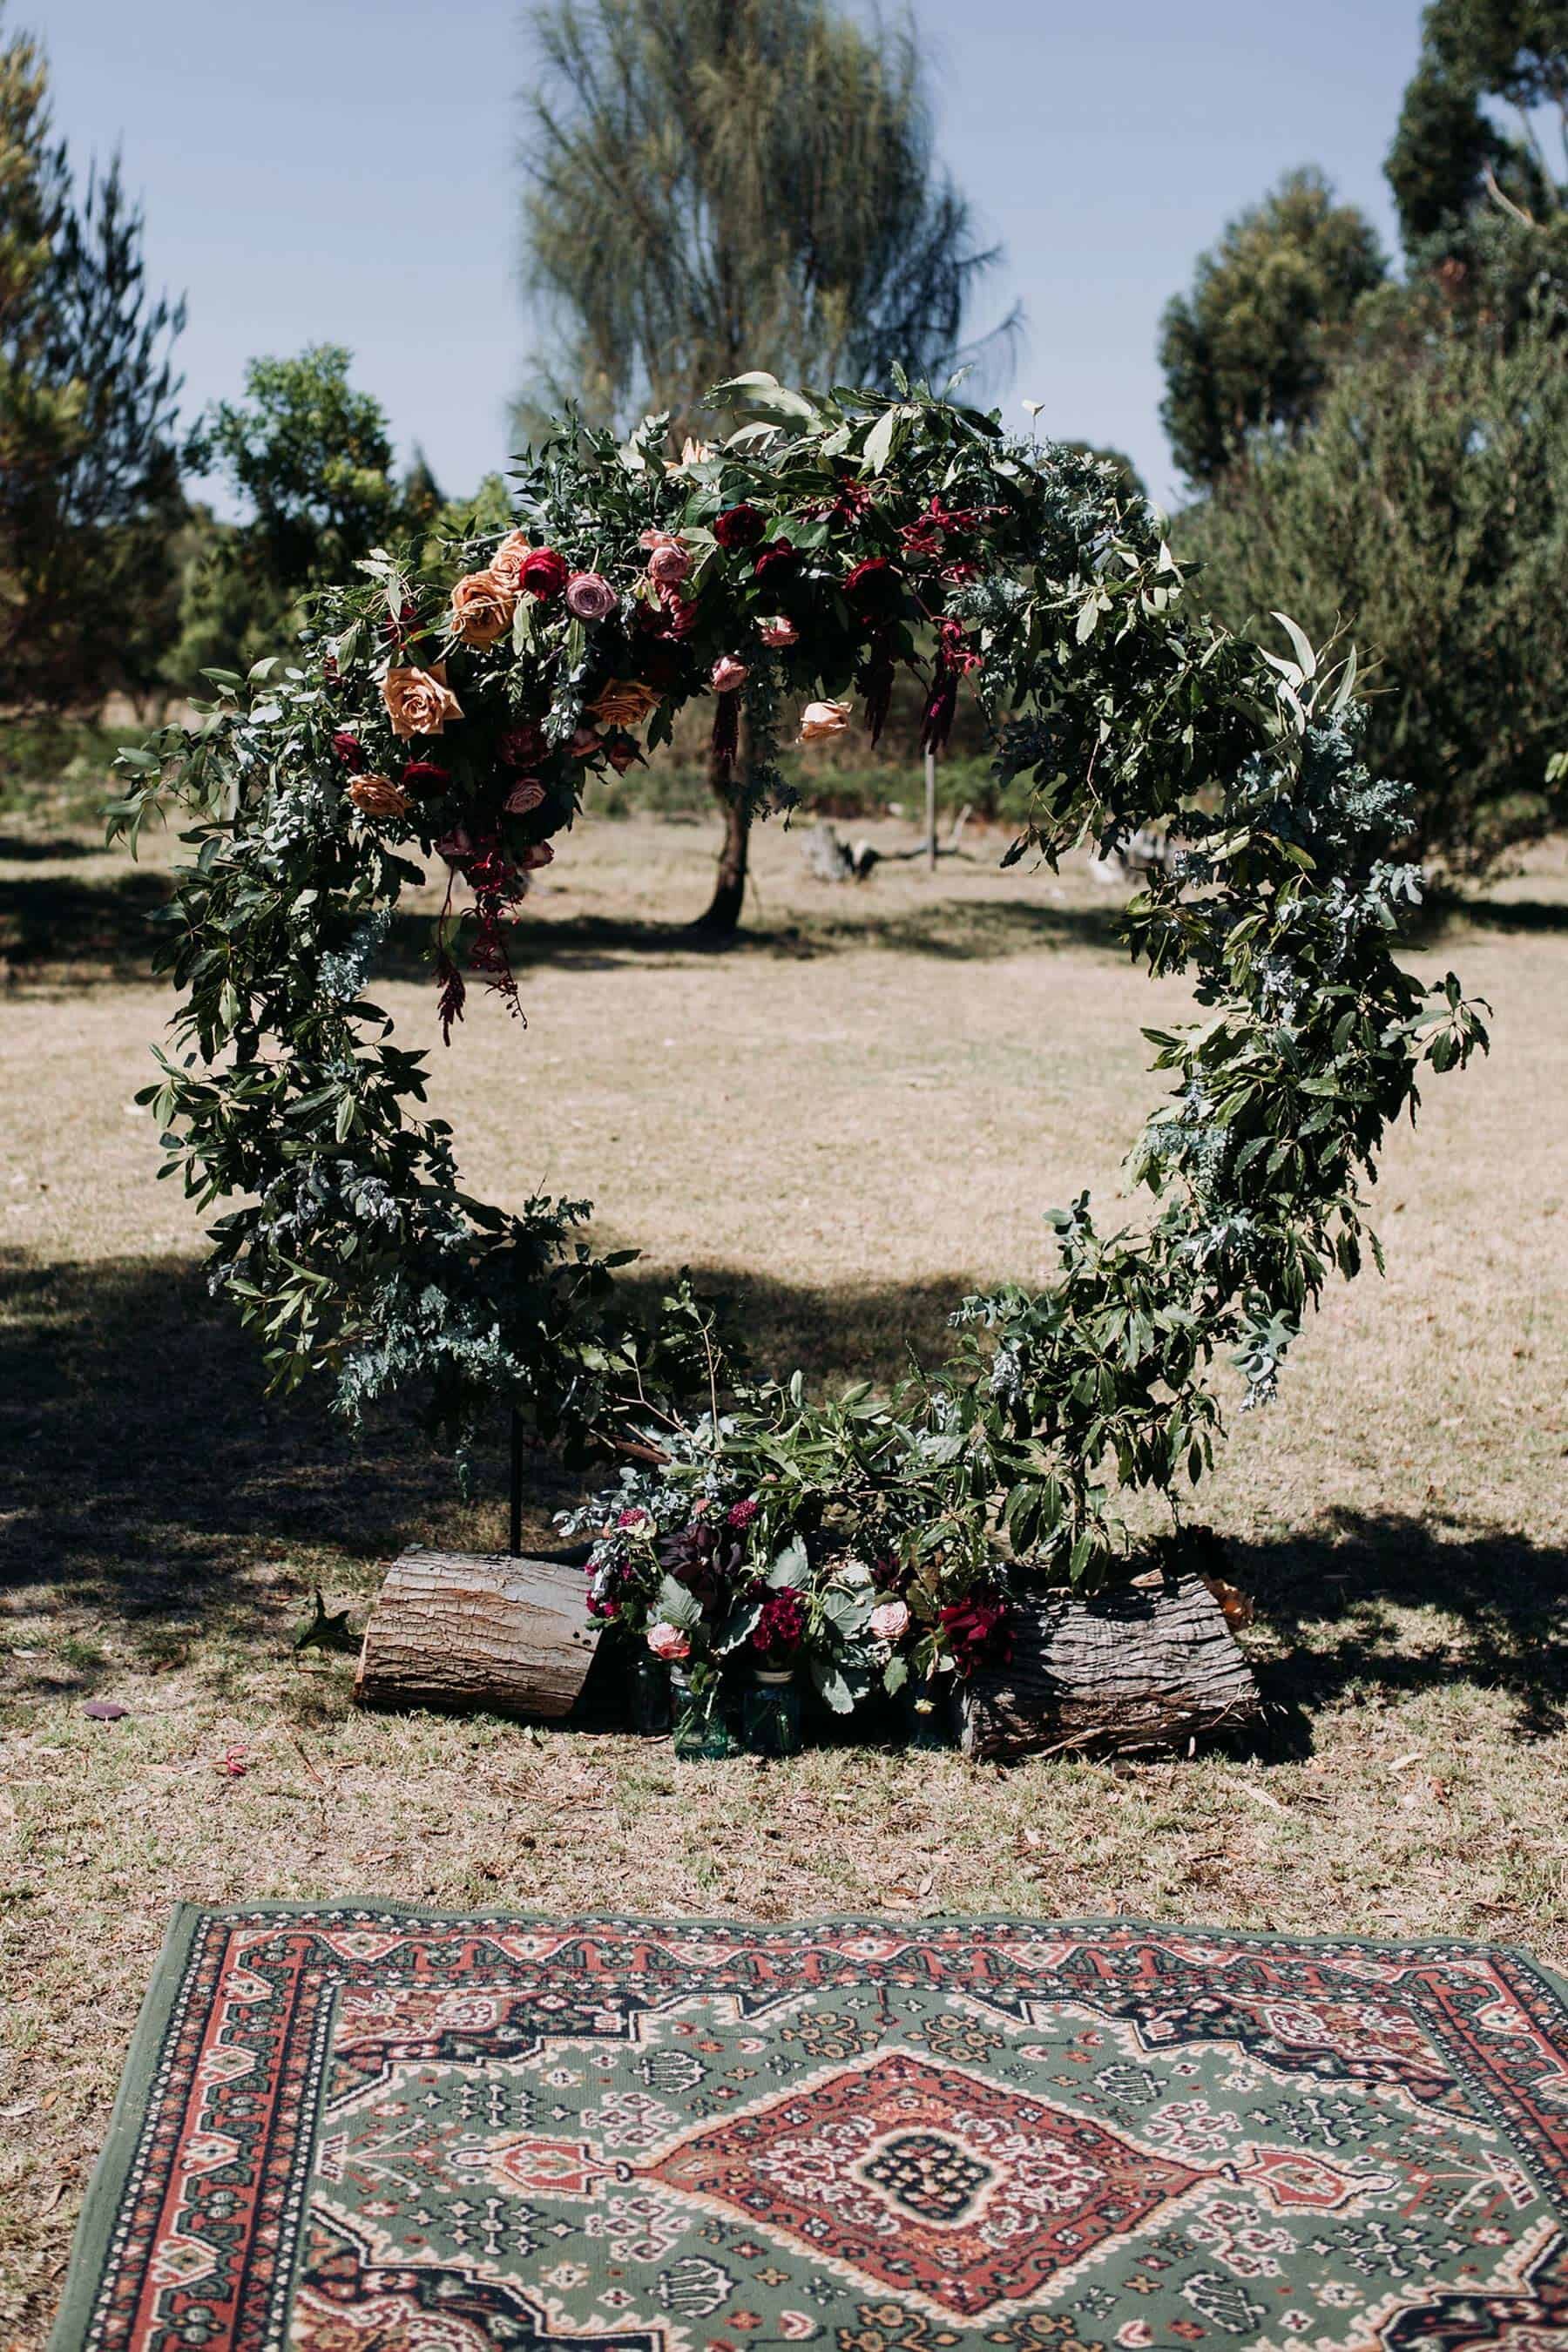 Circle floral arbour with lots of greenery